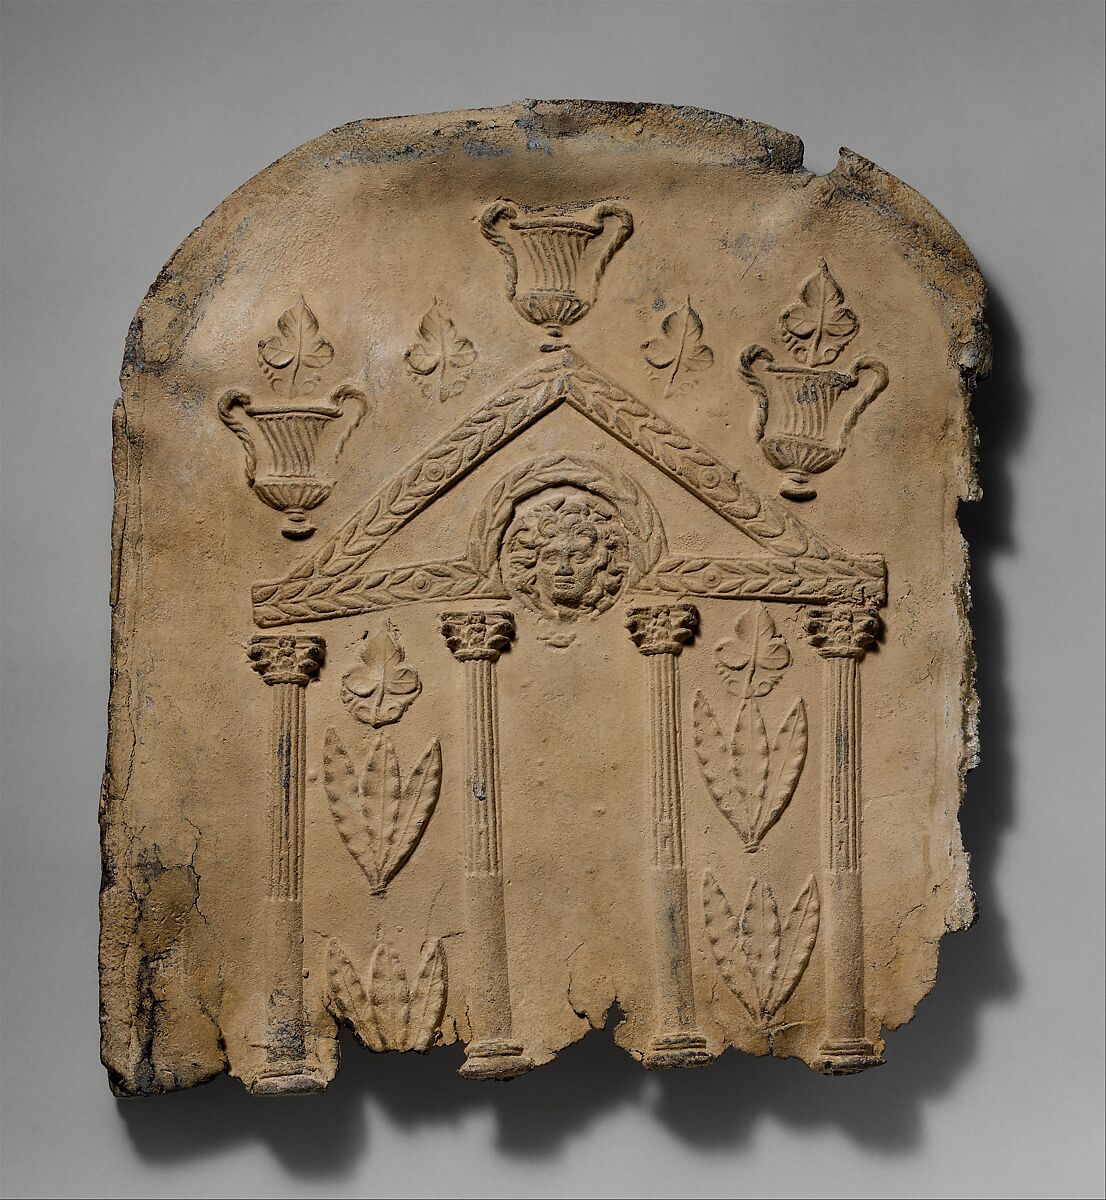 Lid and end panels of a lead sarcophagus, Lead, Roman 